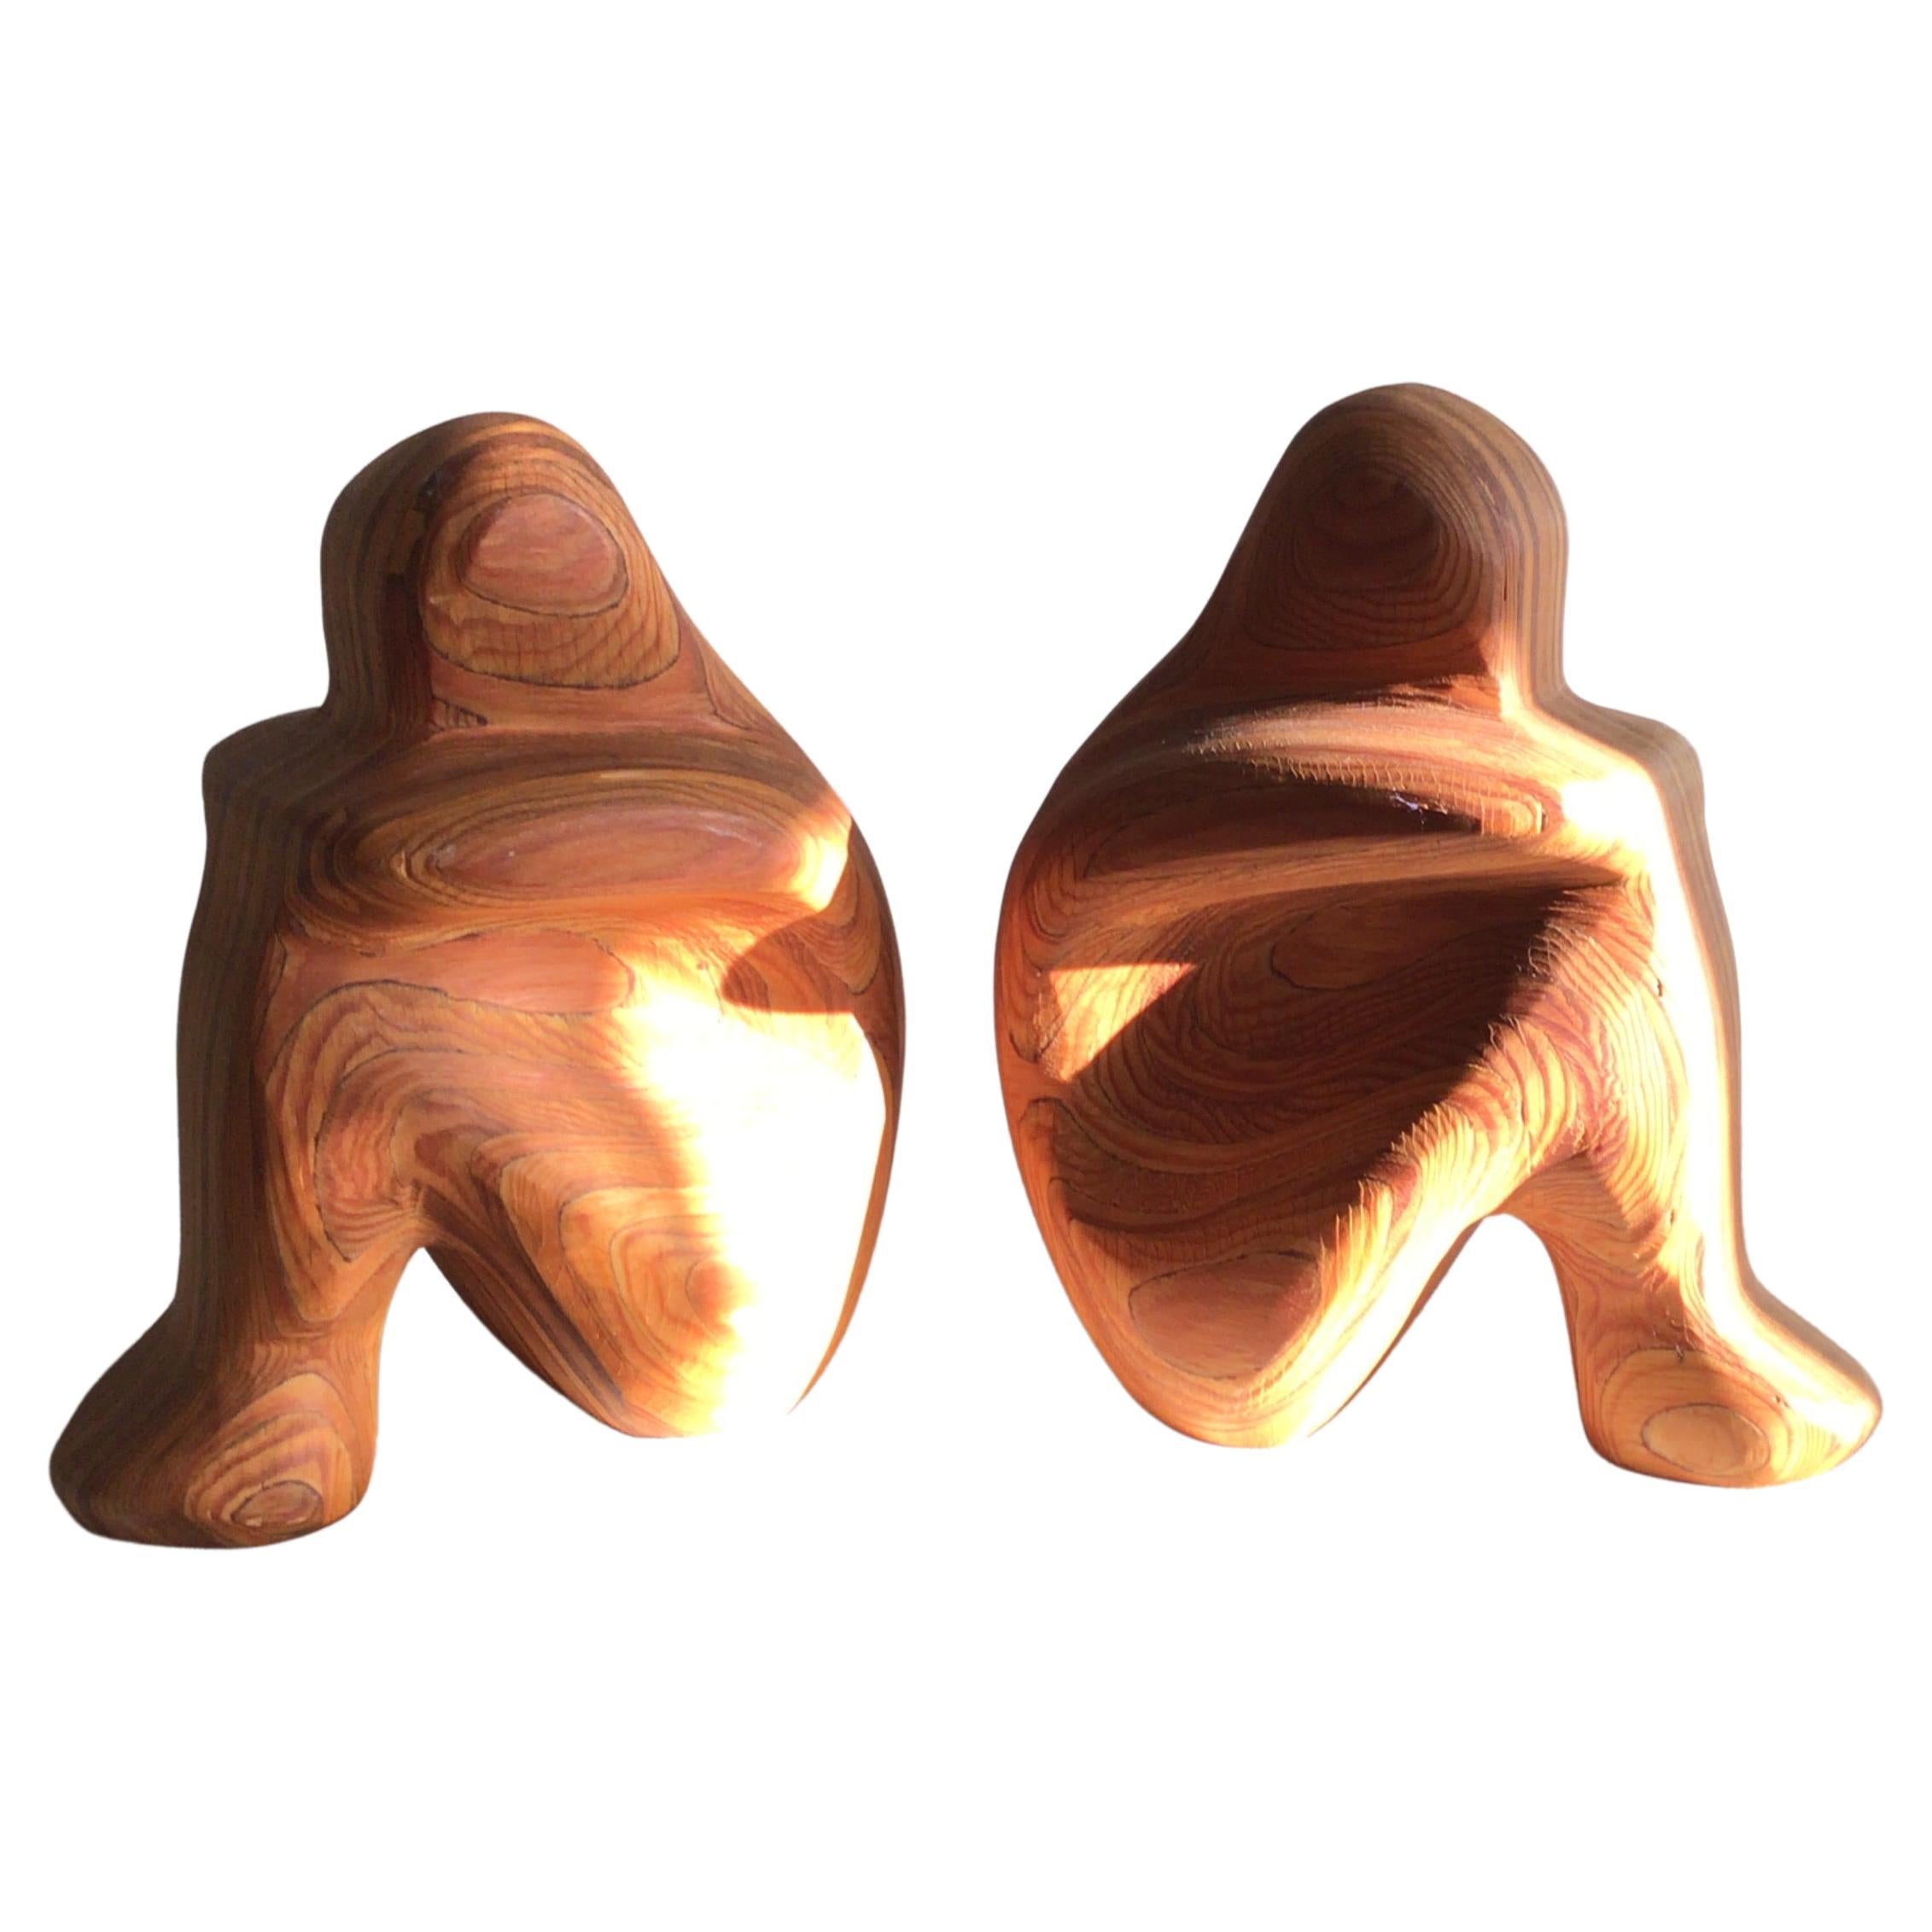 1980s Swirled Wood Sculptural Bookends